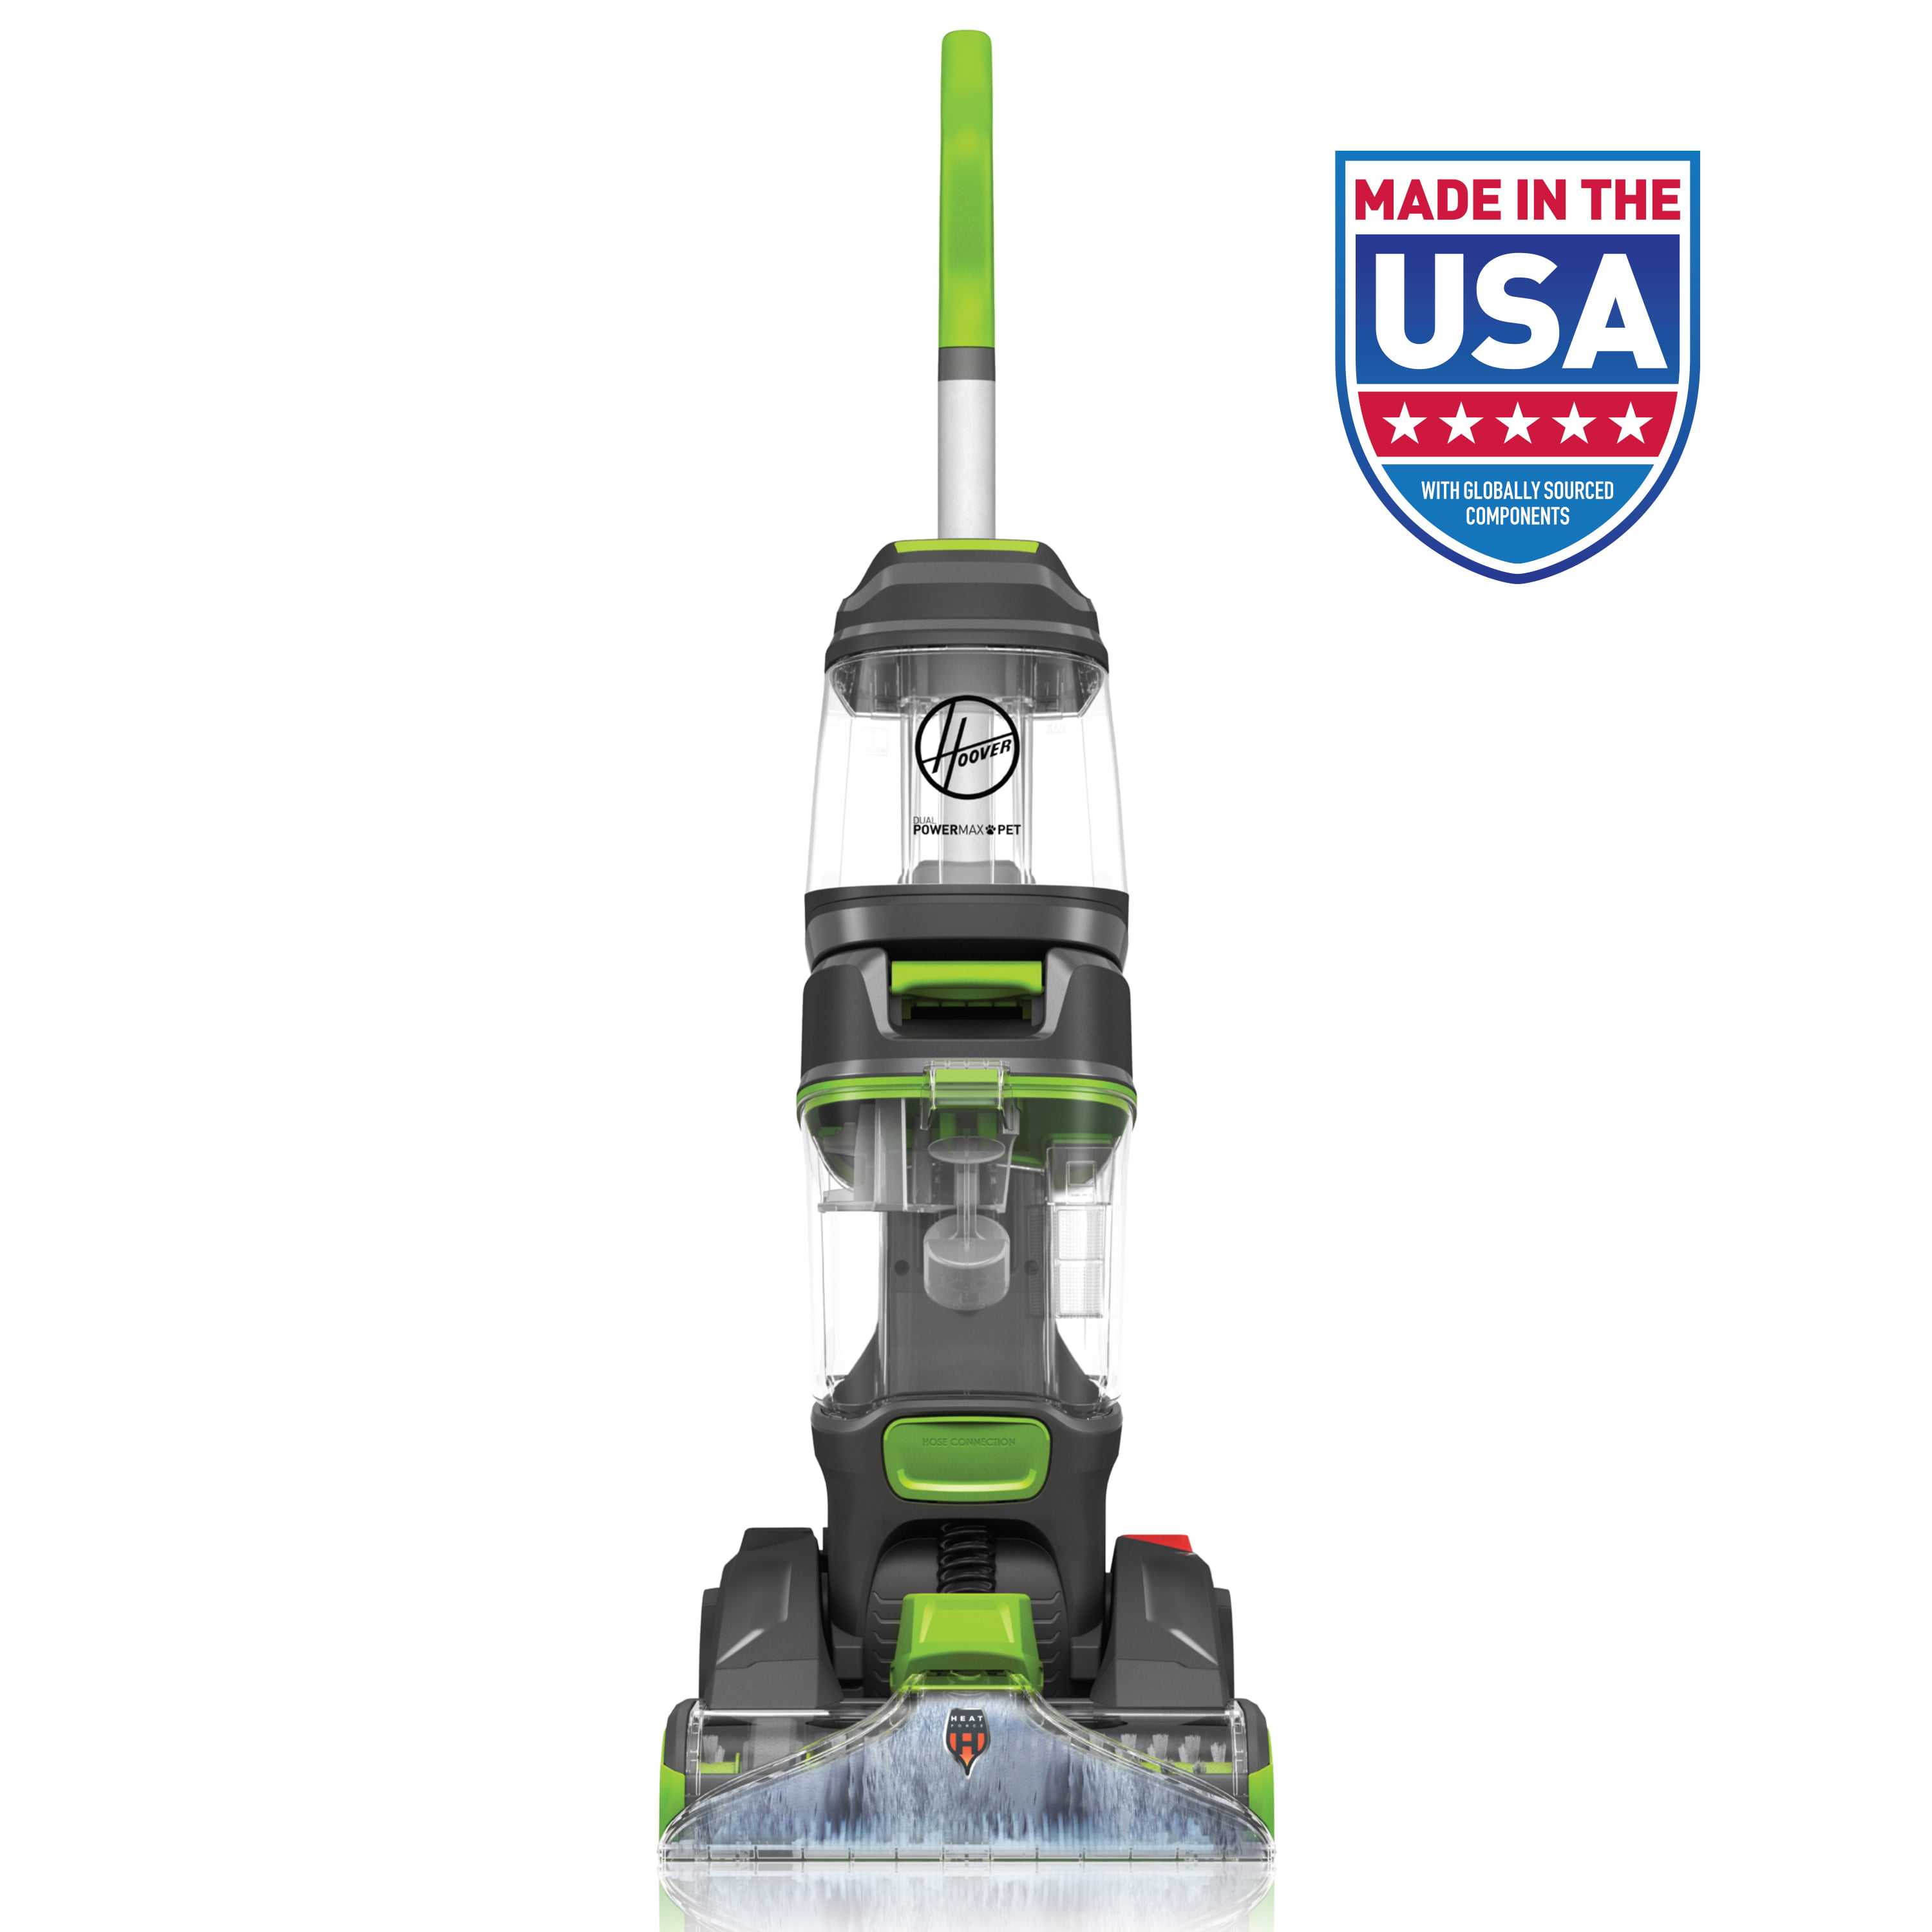 The best Presidents Day deals on vacuums